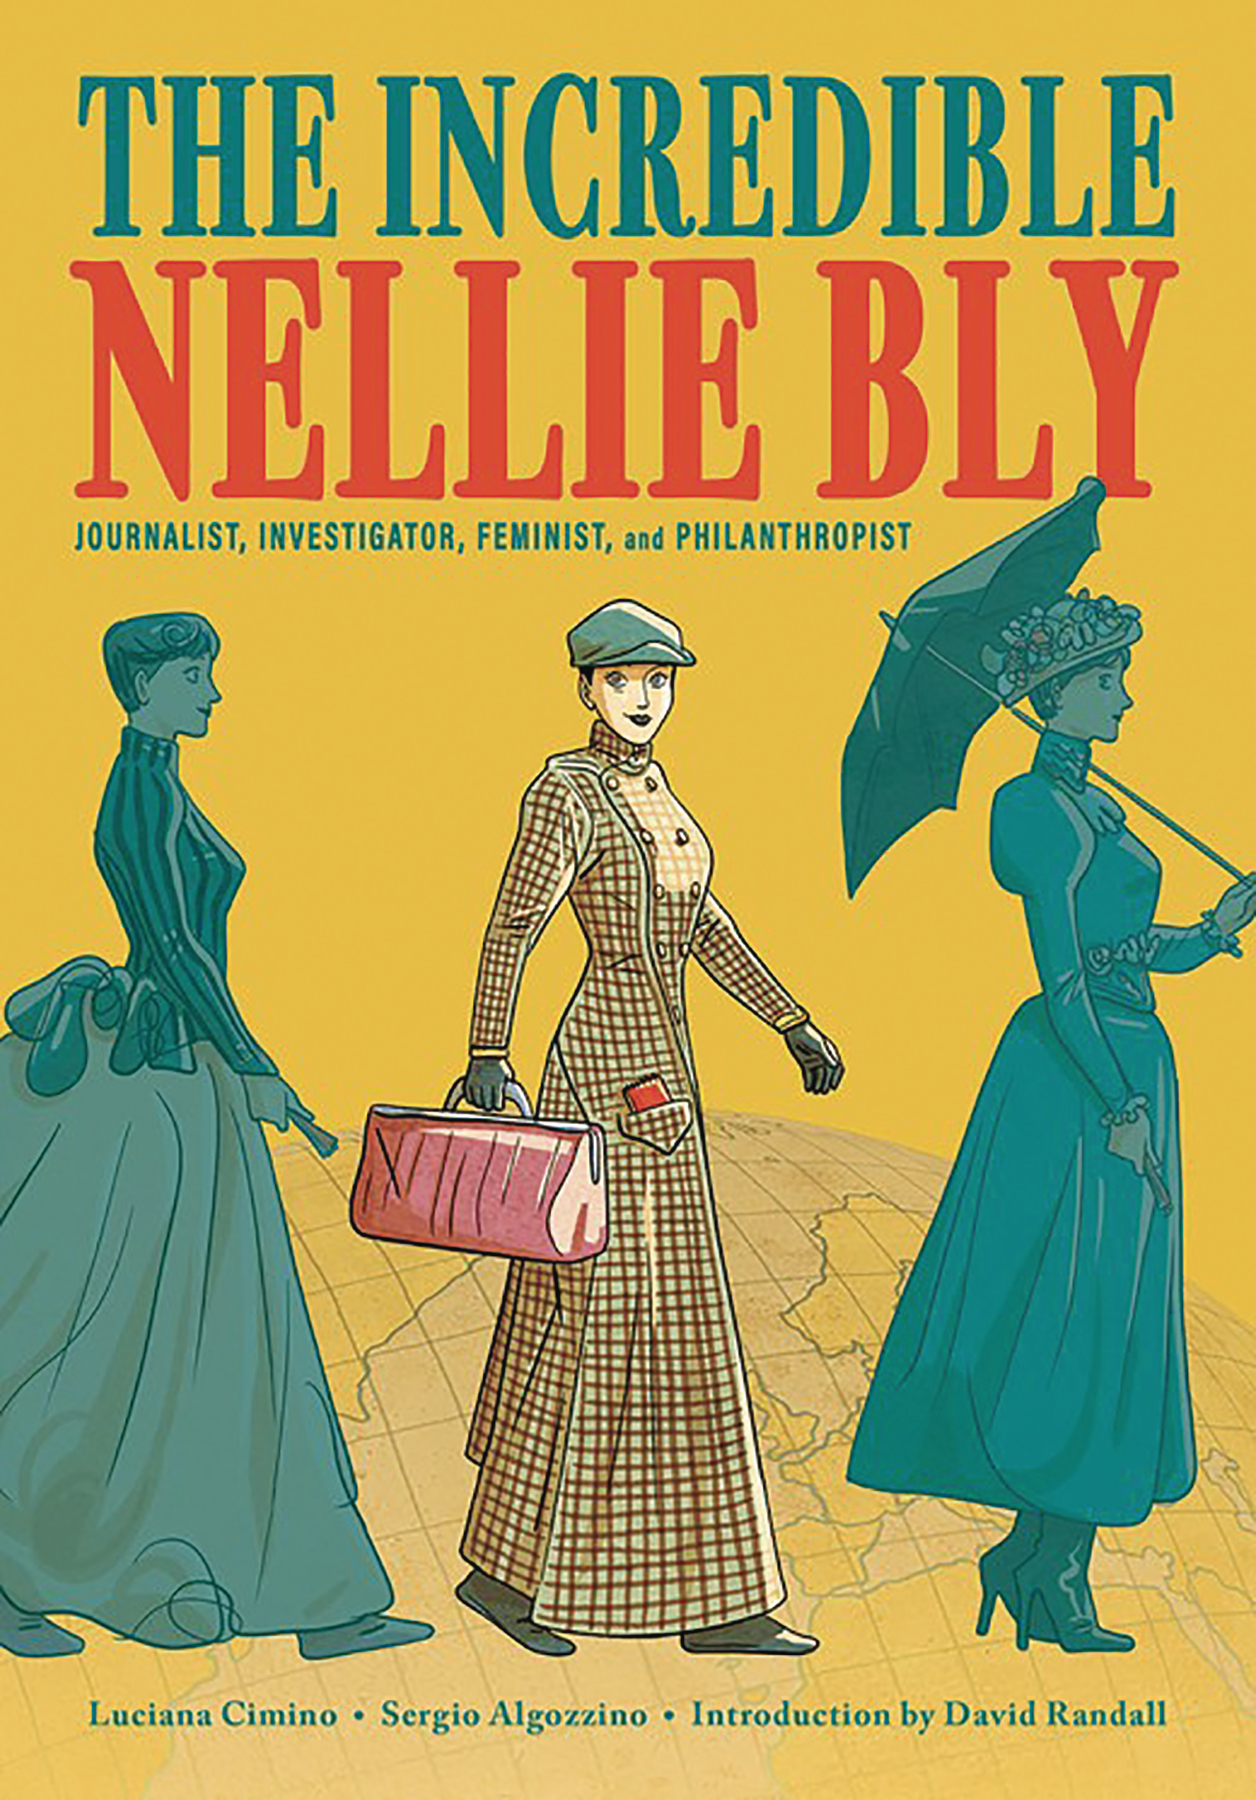 Incredible Nellie Bly Graphic Novel